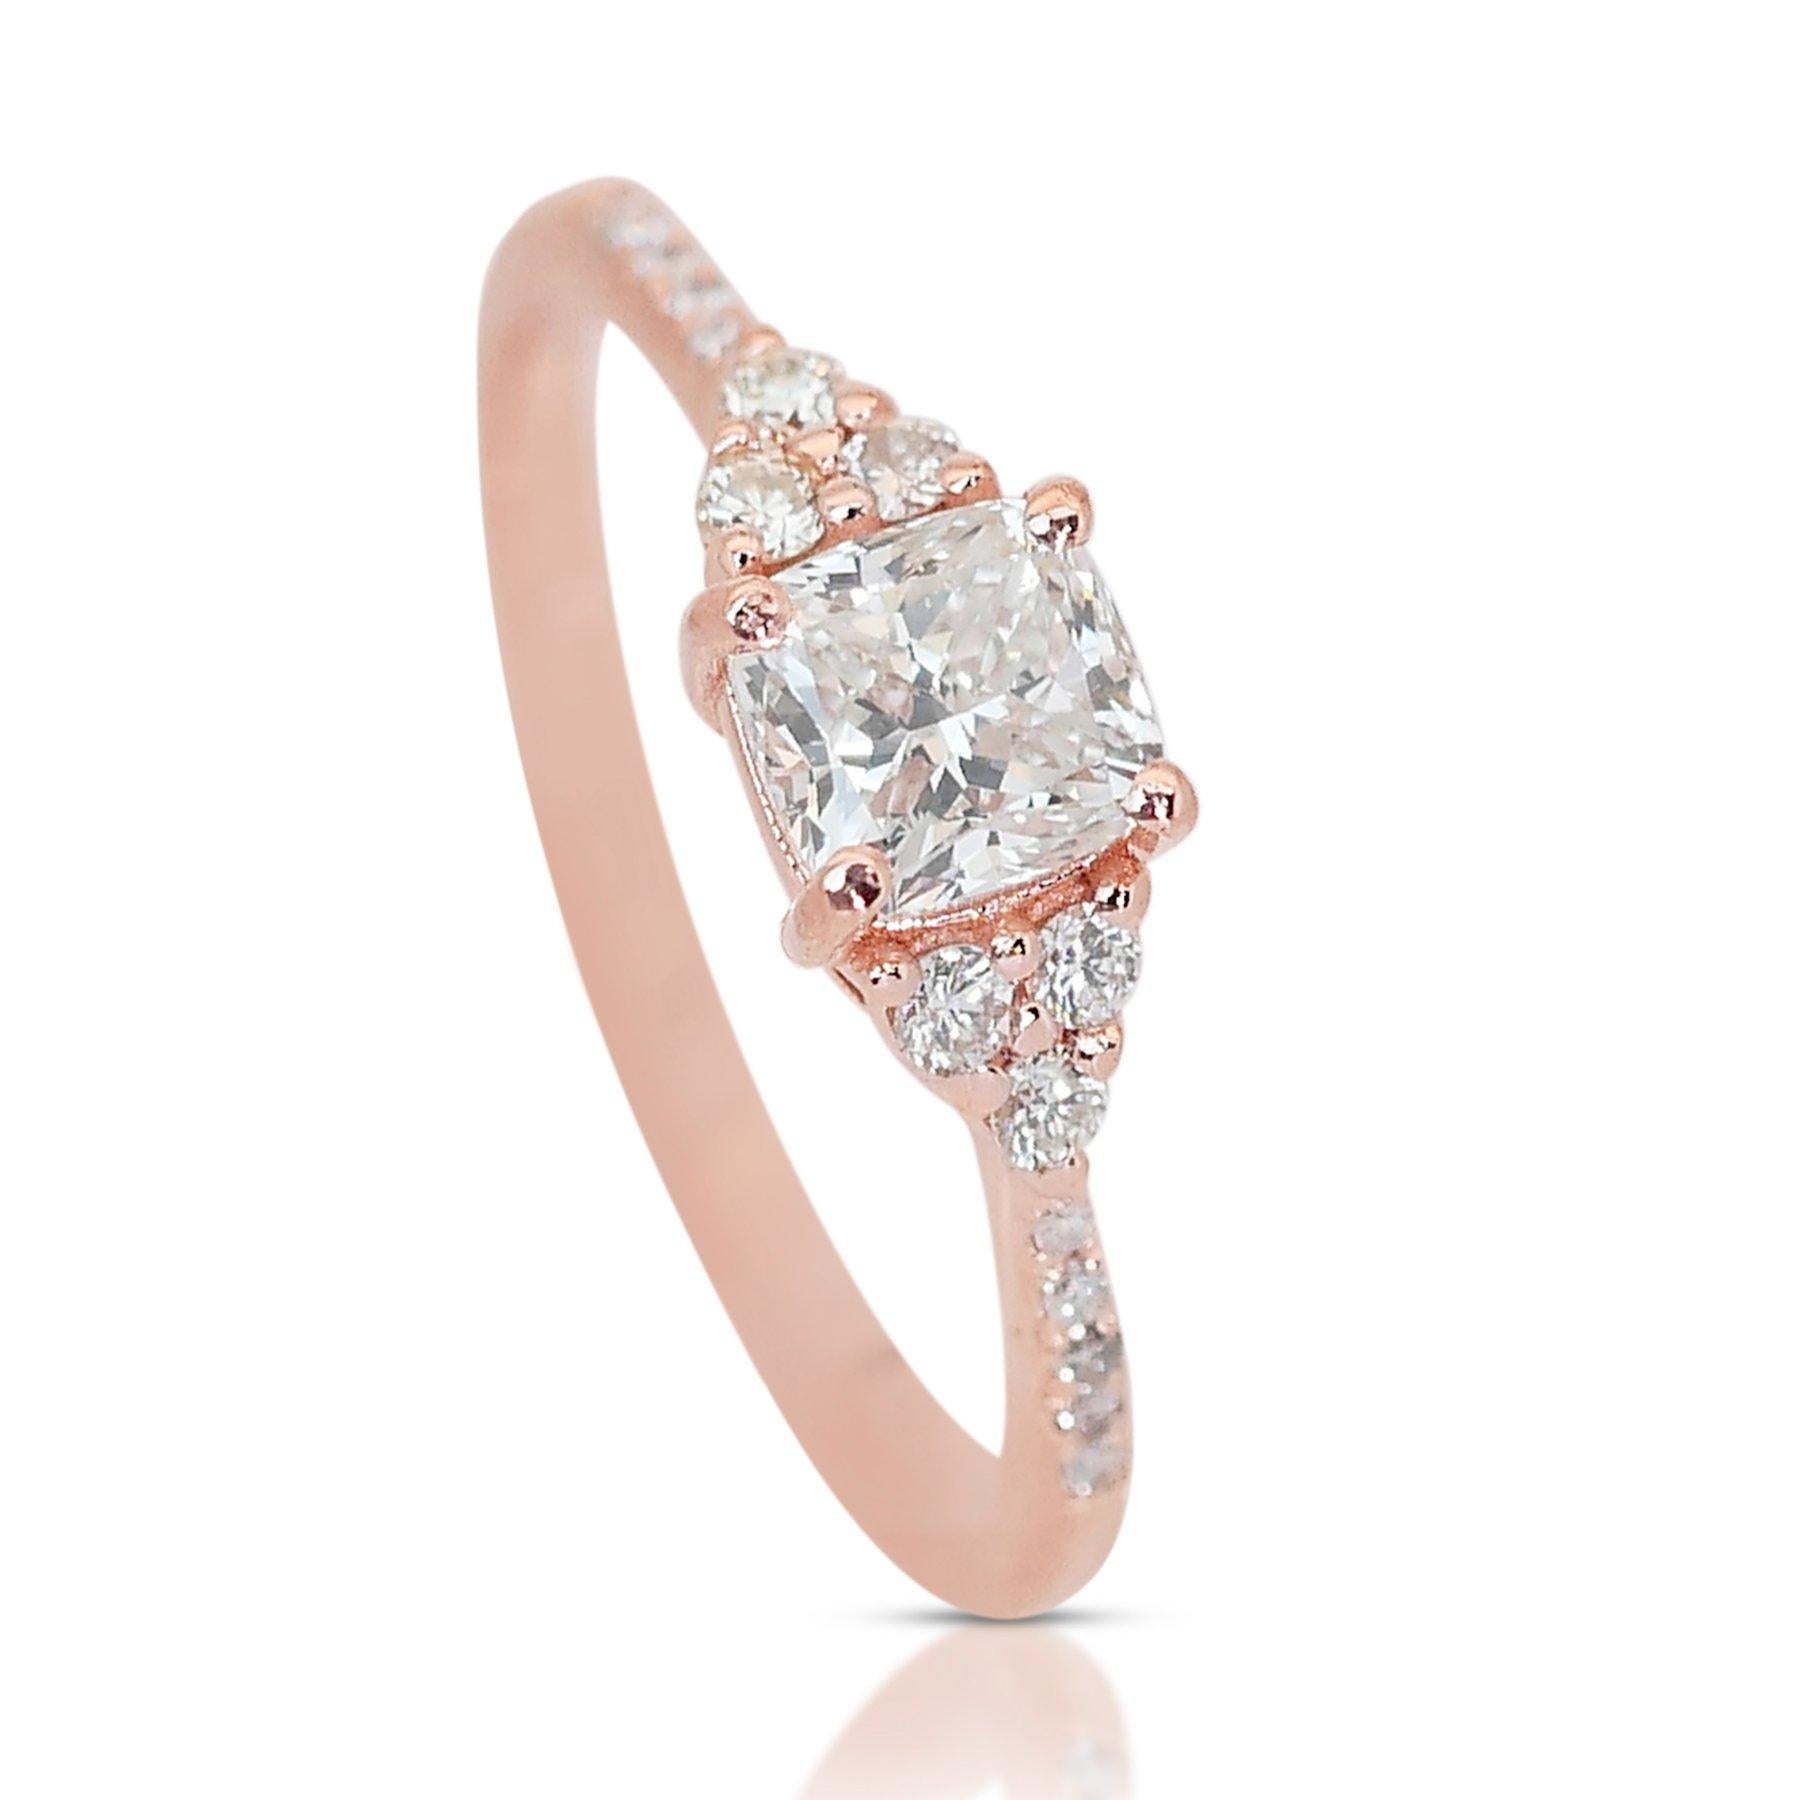 Sophisticated 1.65ct Diamonds Pave Ring in 14k Rose Gold - GIA Certified

Embrace timeless elegance with this captivating 1.65-carat diamond ring, crafted from the warm hues of 14k rose gold. At its core, a 1.50-carat cushion-cut diamond shines